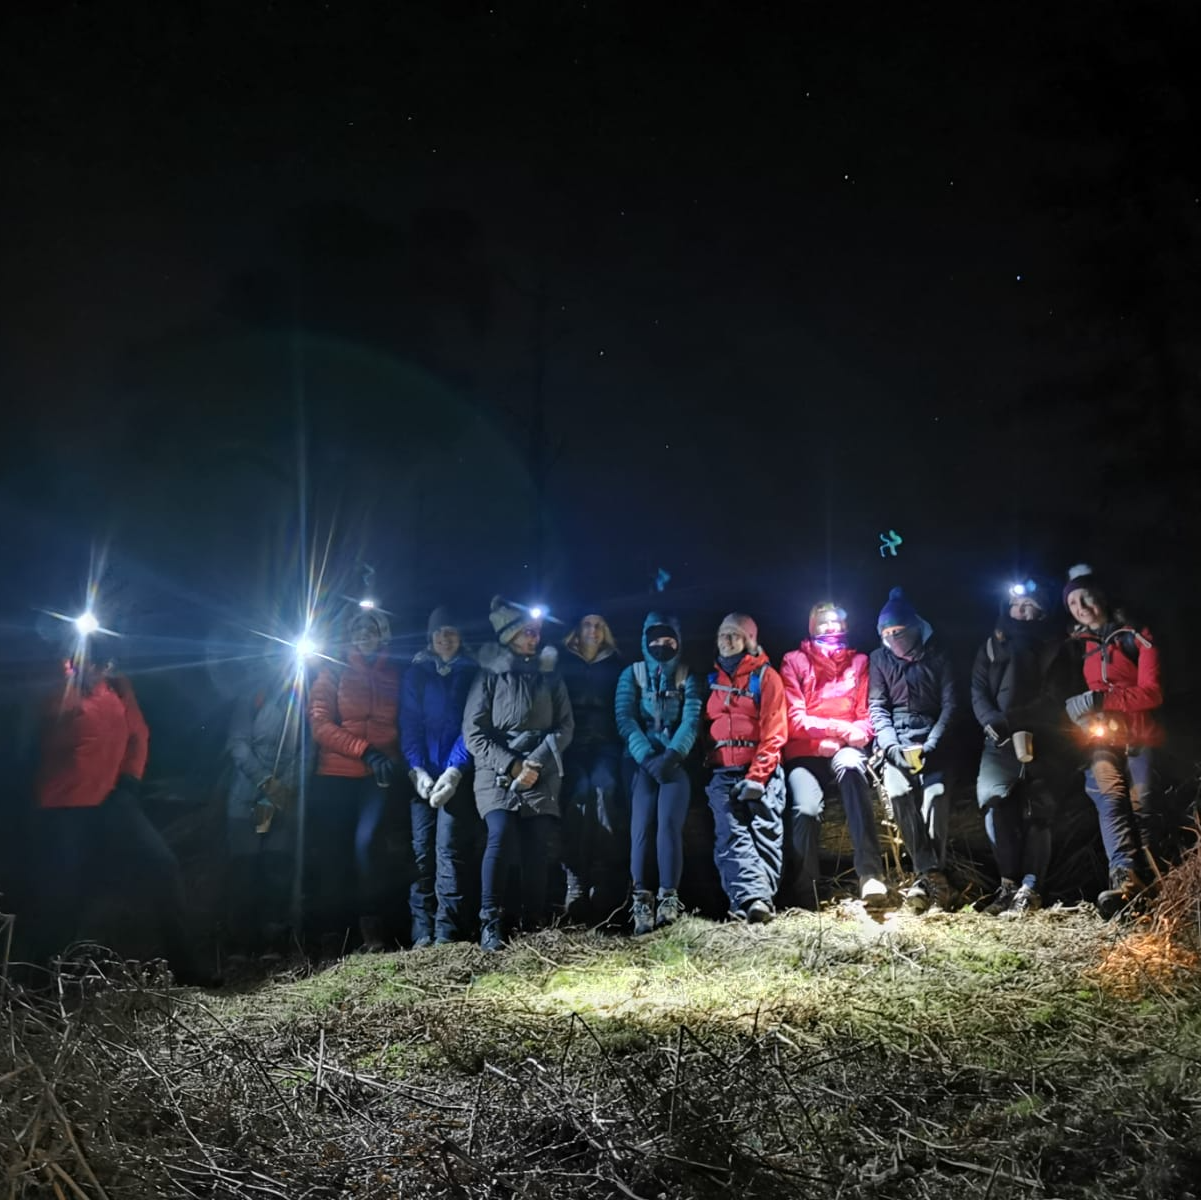 Photo from an Adventures for the Soul Yoga, mindfulness and night walk event Feb 2020  (c) AFS Mountaineering